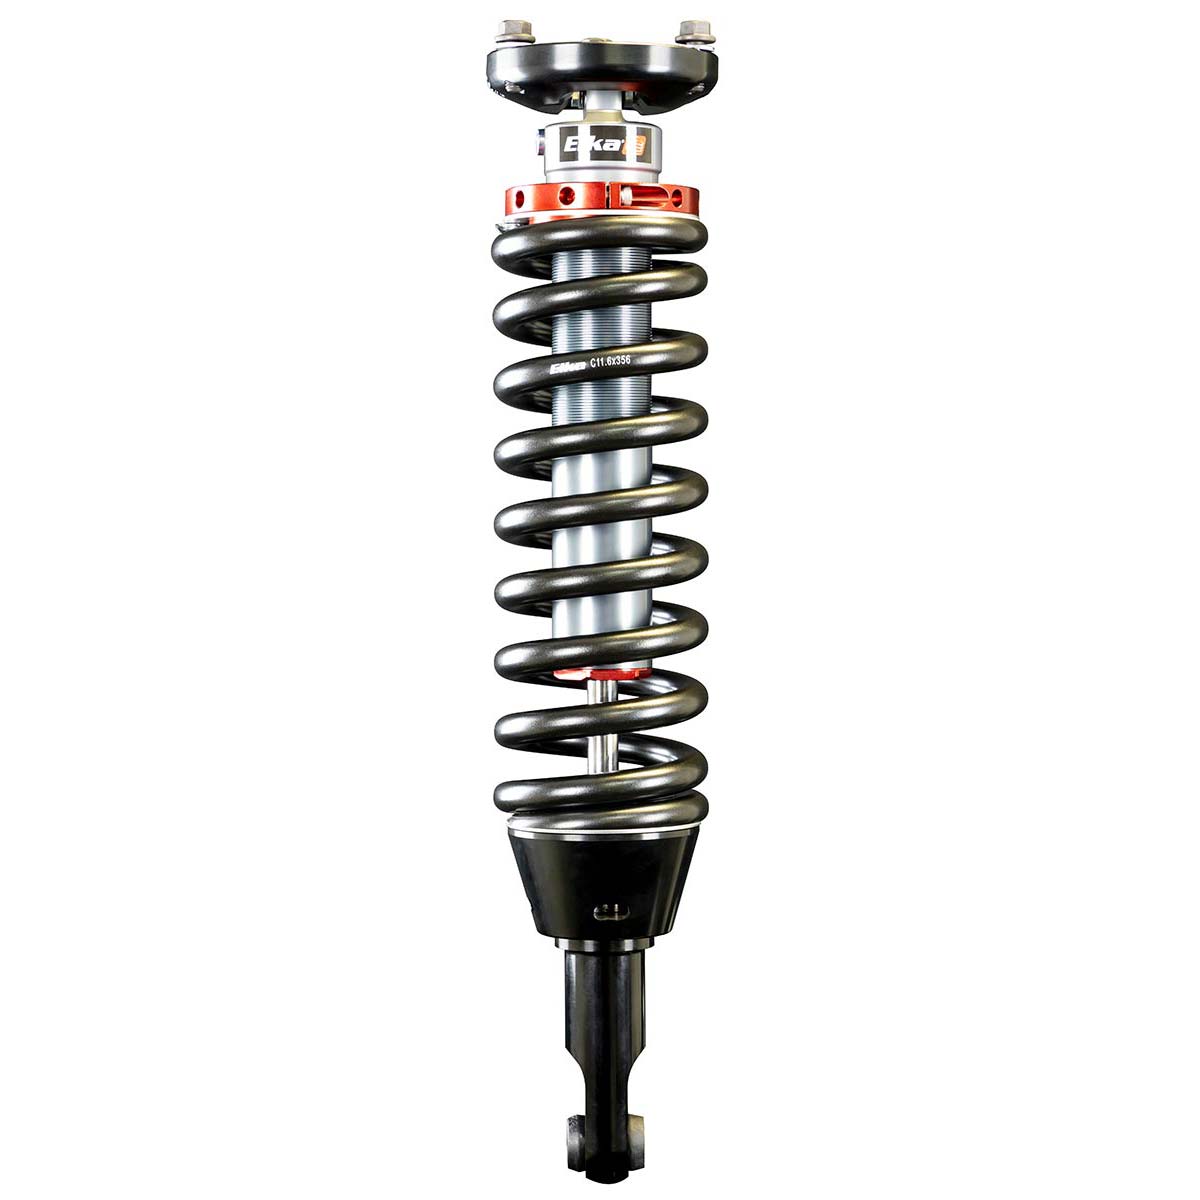 2.0 IFP FRONT SHOCKS for TOYOTA FJ CRUISER, 2007 to 2014 (0 in. to 3 in. lift) - RA Motorsports Canada